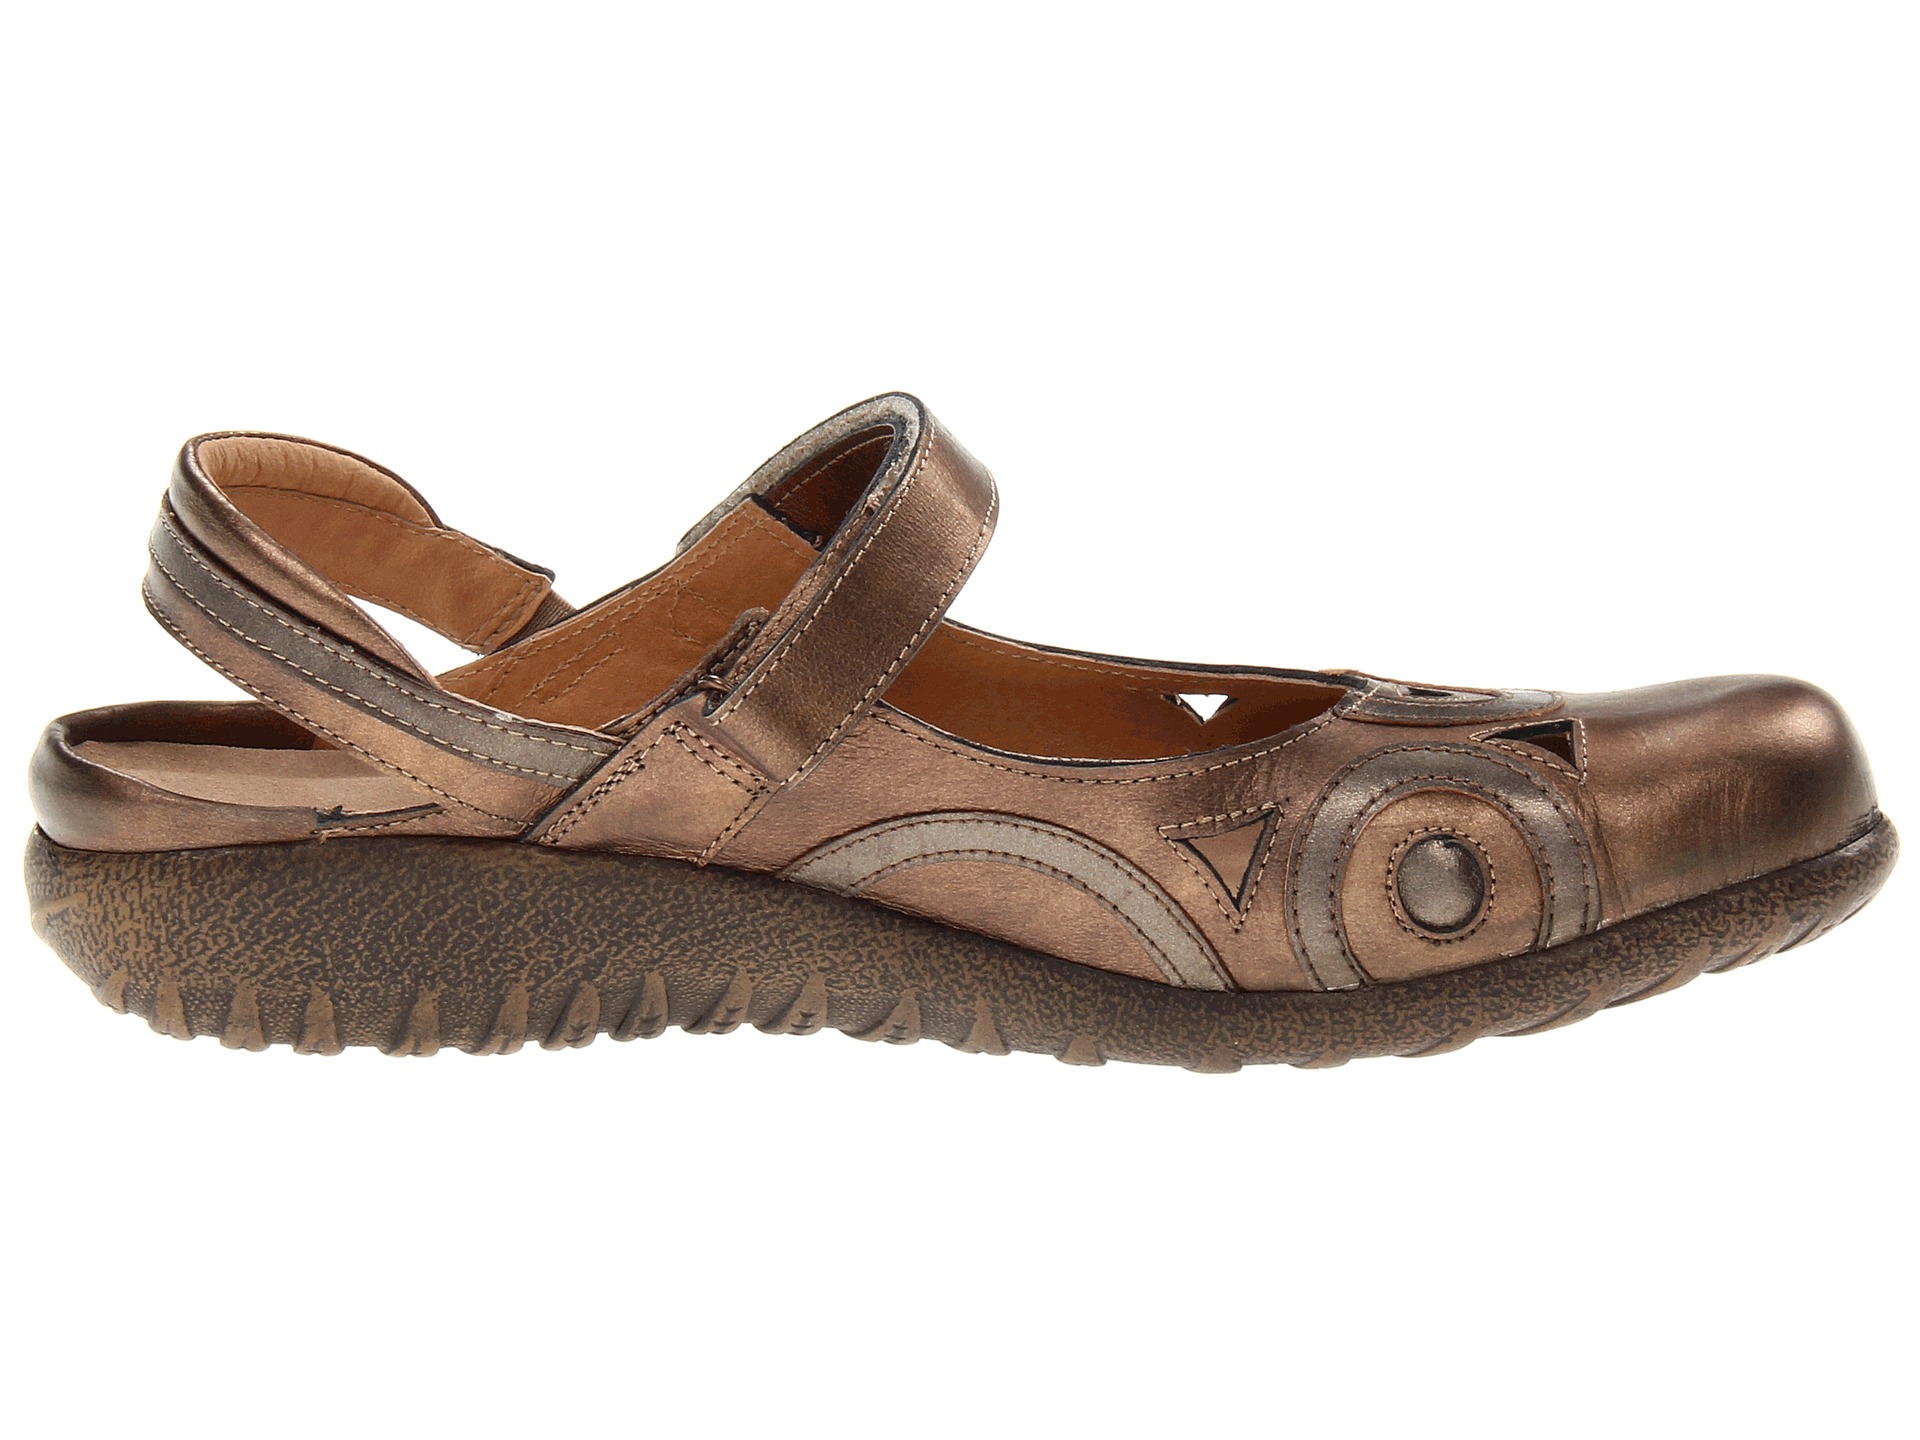 Naot Footwear Rongo Brass Leather/Pewter Leather - Zappos.com Free ...